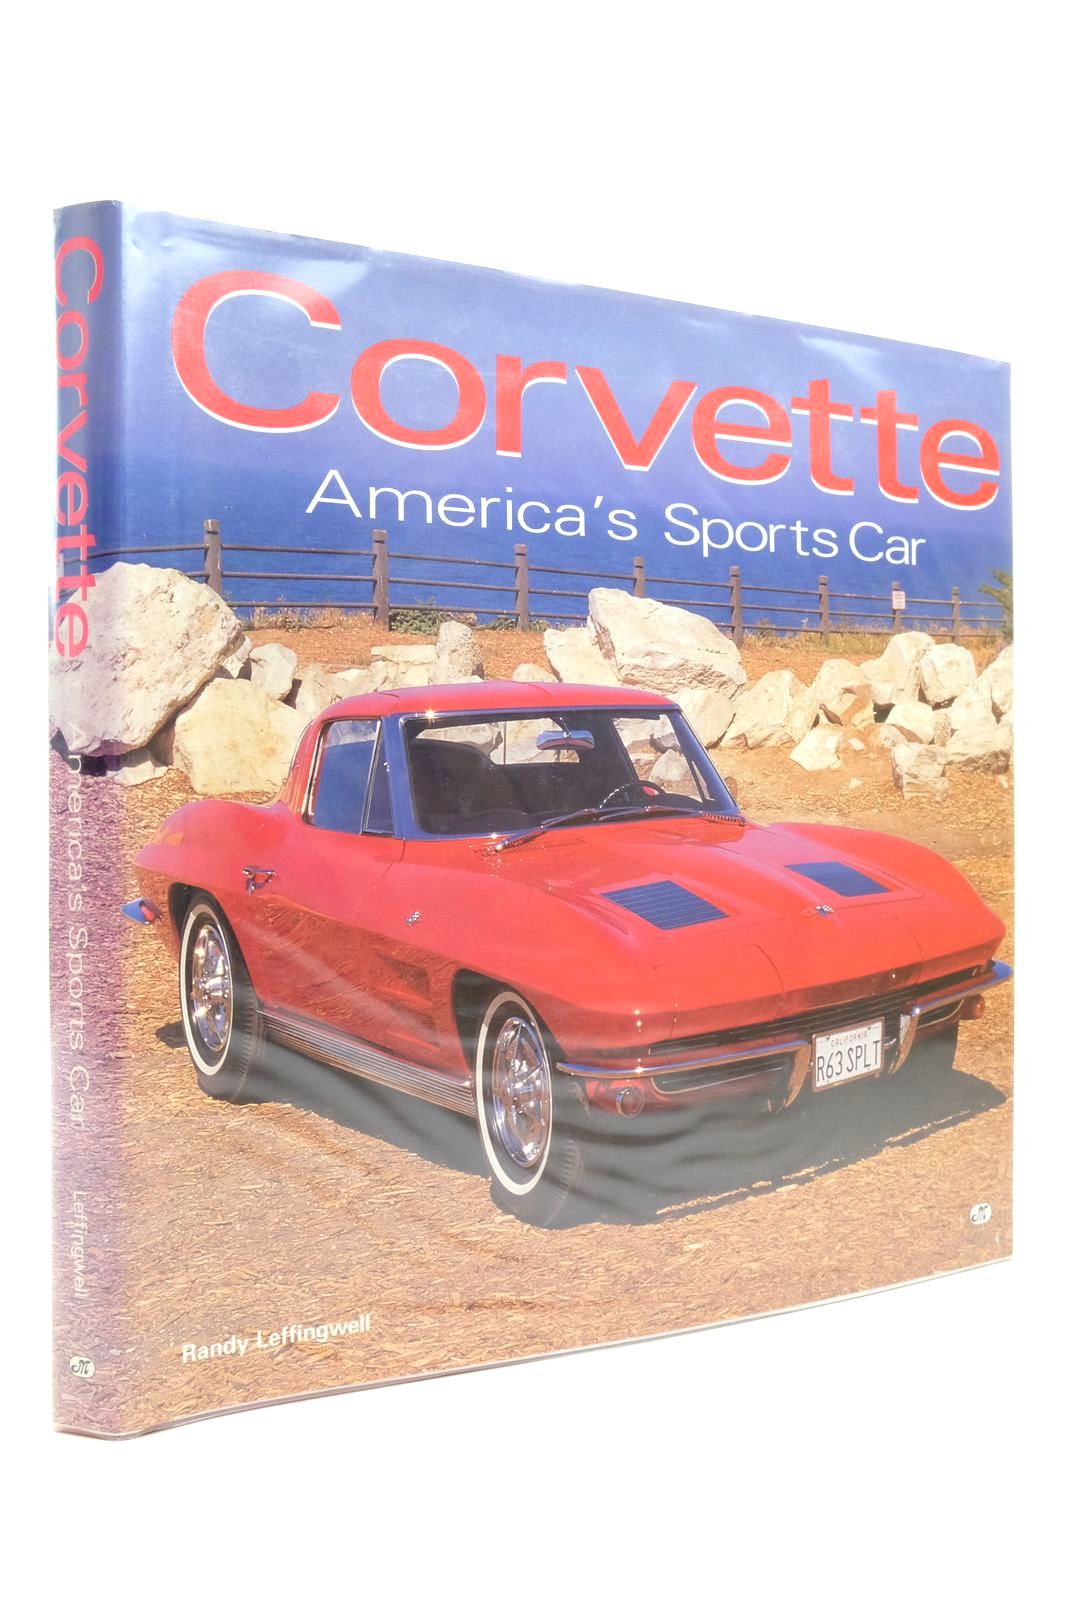 Photo of CORVETTE: AMERICA'S SPORTS CAR written by Leffingwell, Randy published by Motorbooks International (STOCK CODE: 2138638)  for sale by Stella & Rose's Books